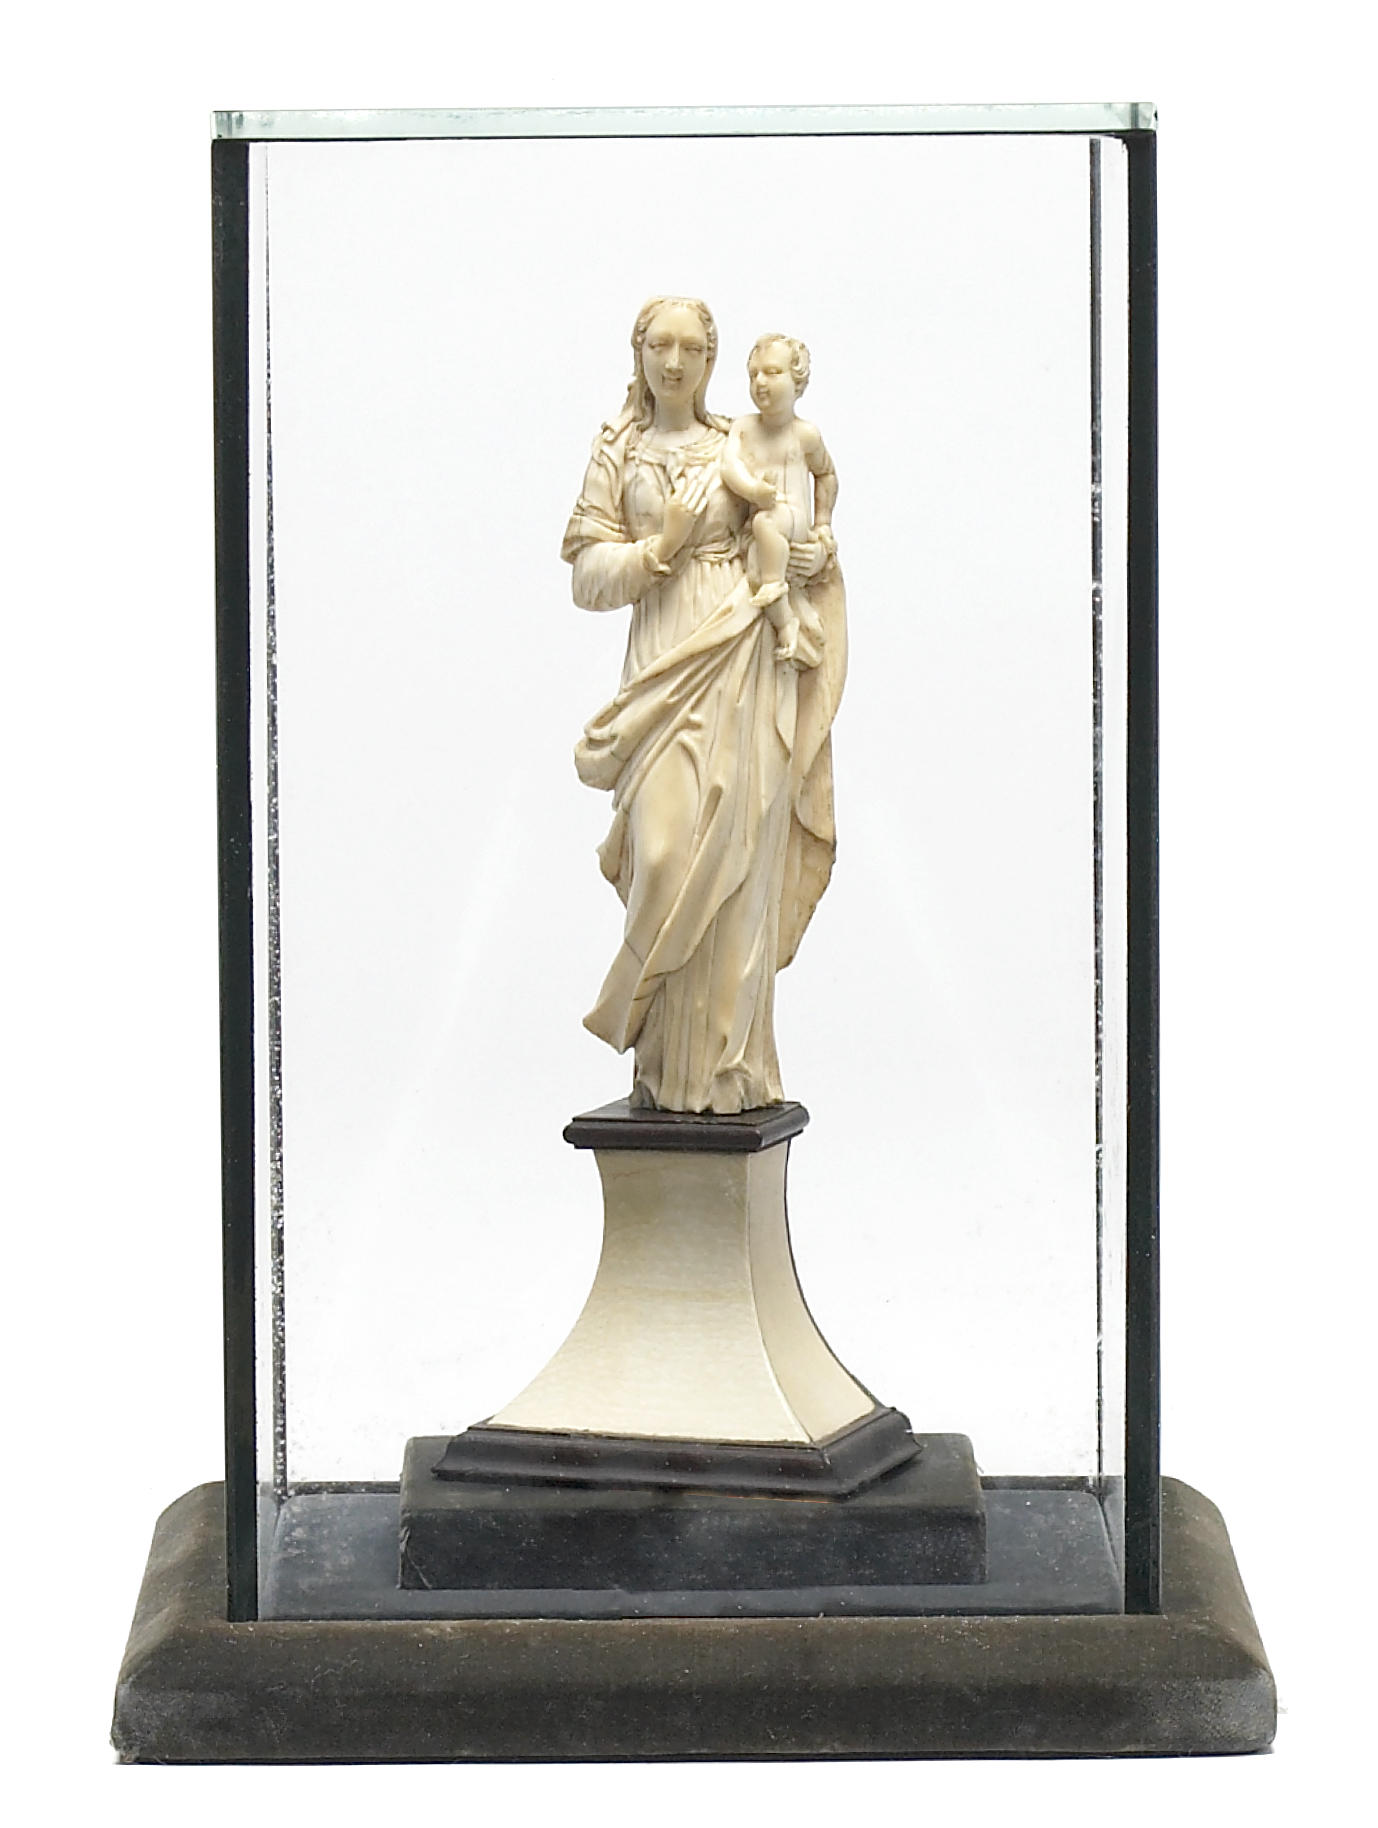 An Italian Baroque carved ivory